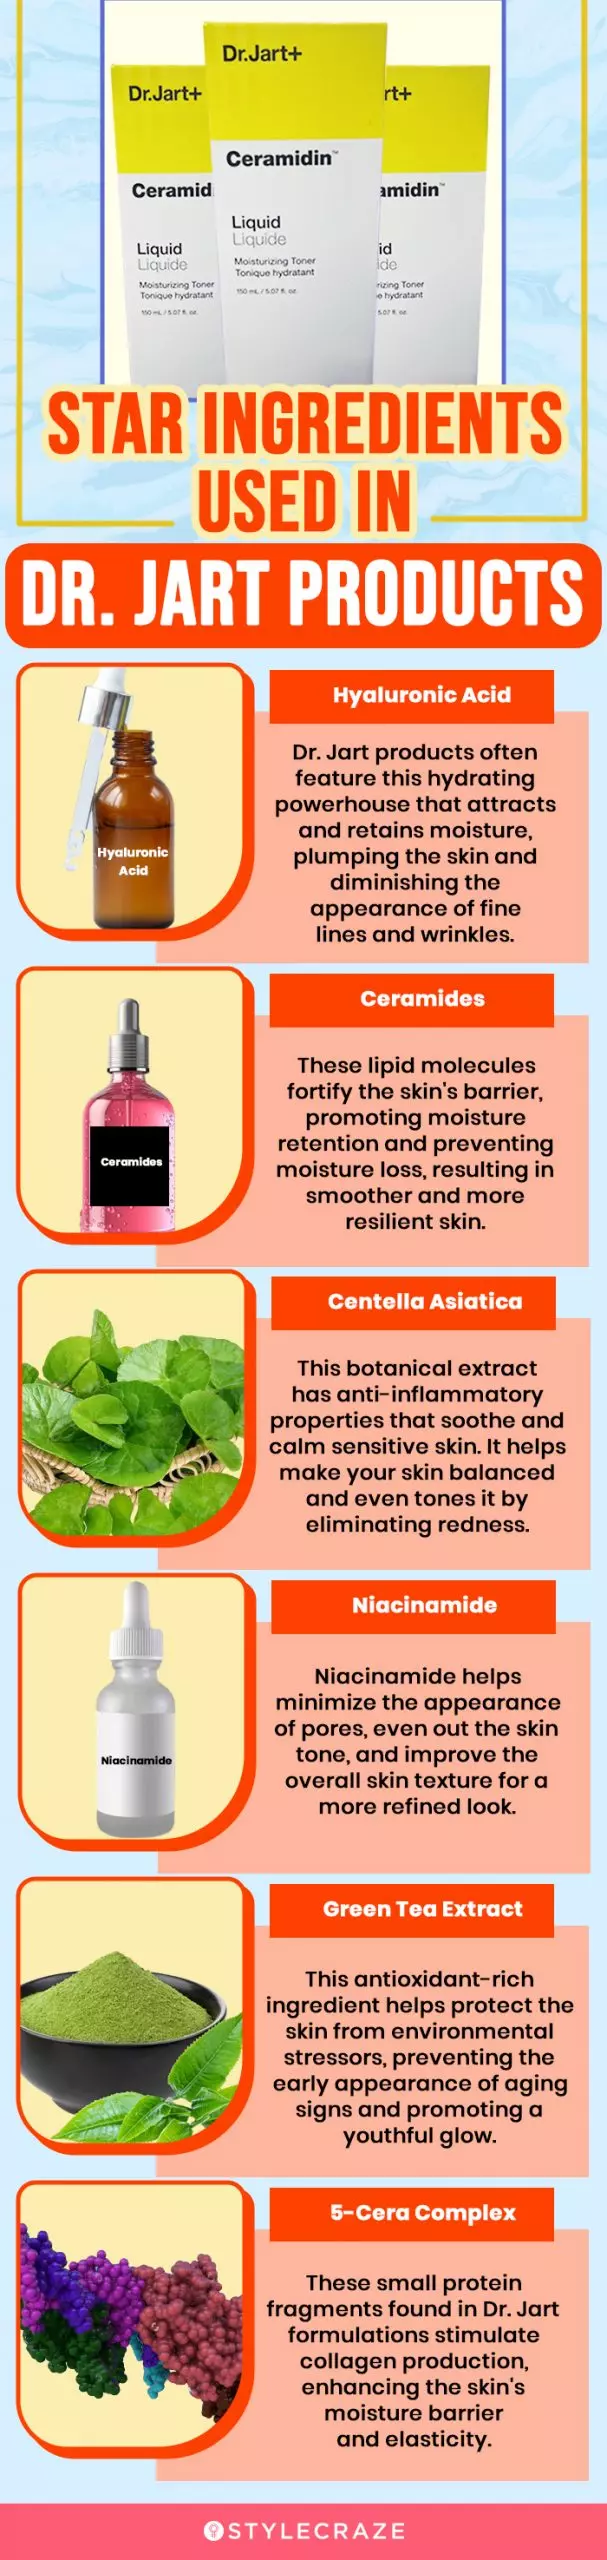 Star Ingredients Used In Dr. Jart Products (infographic)